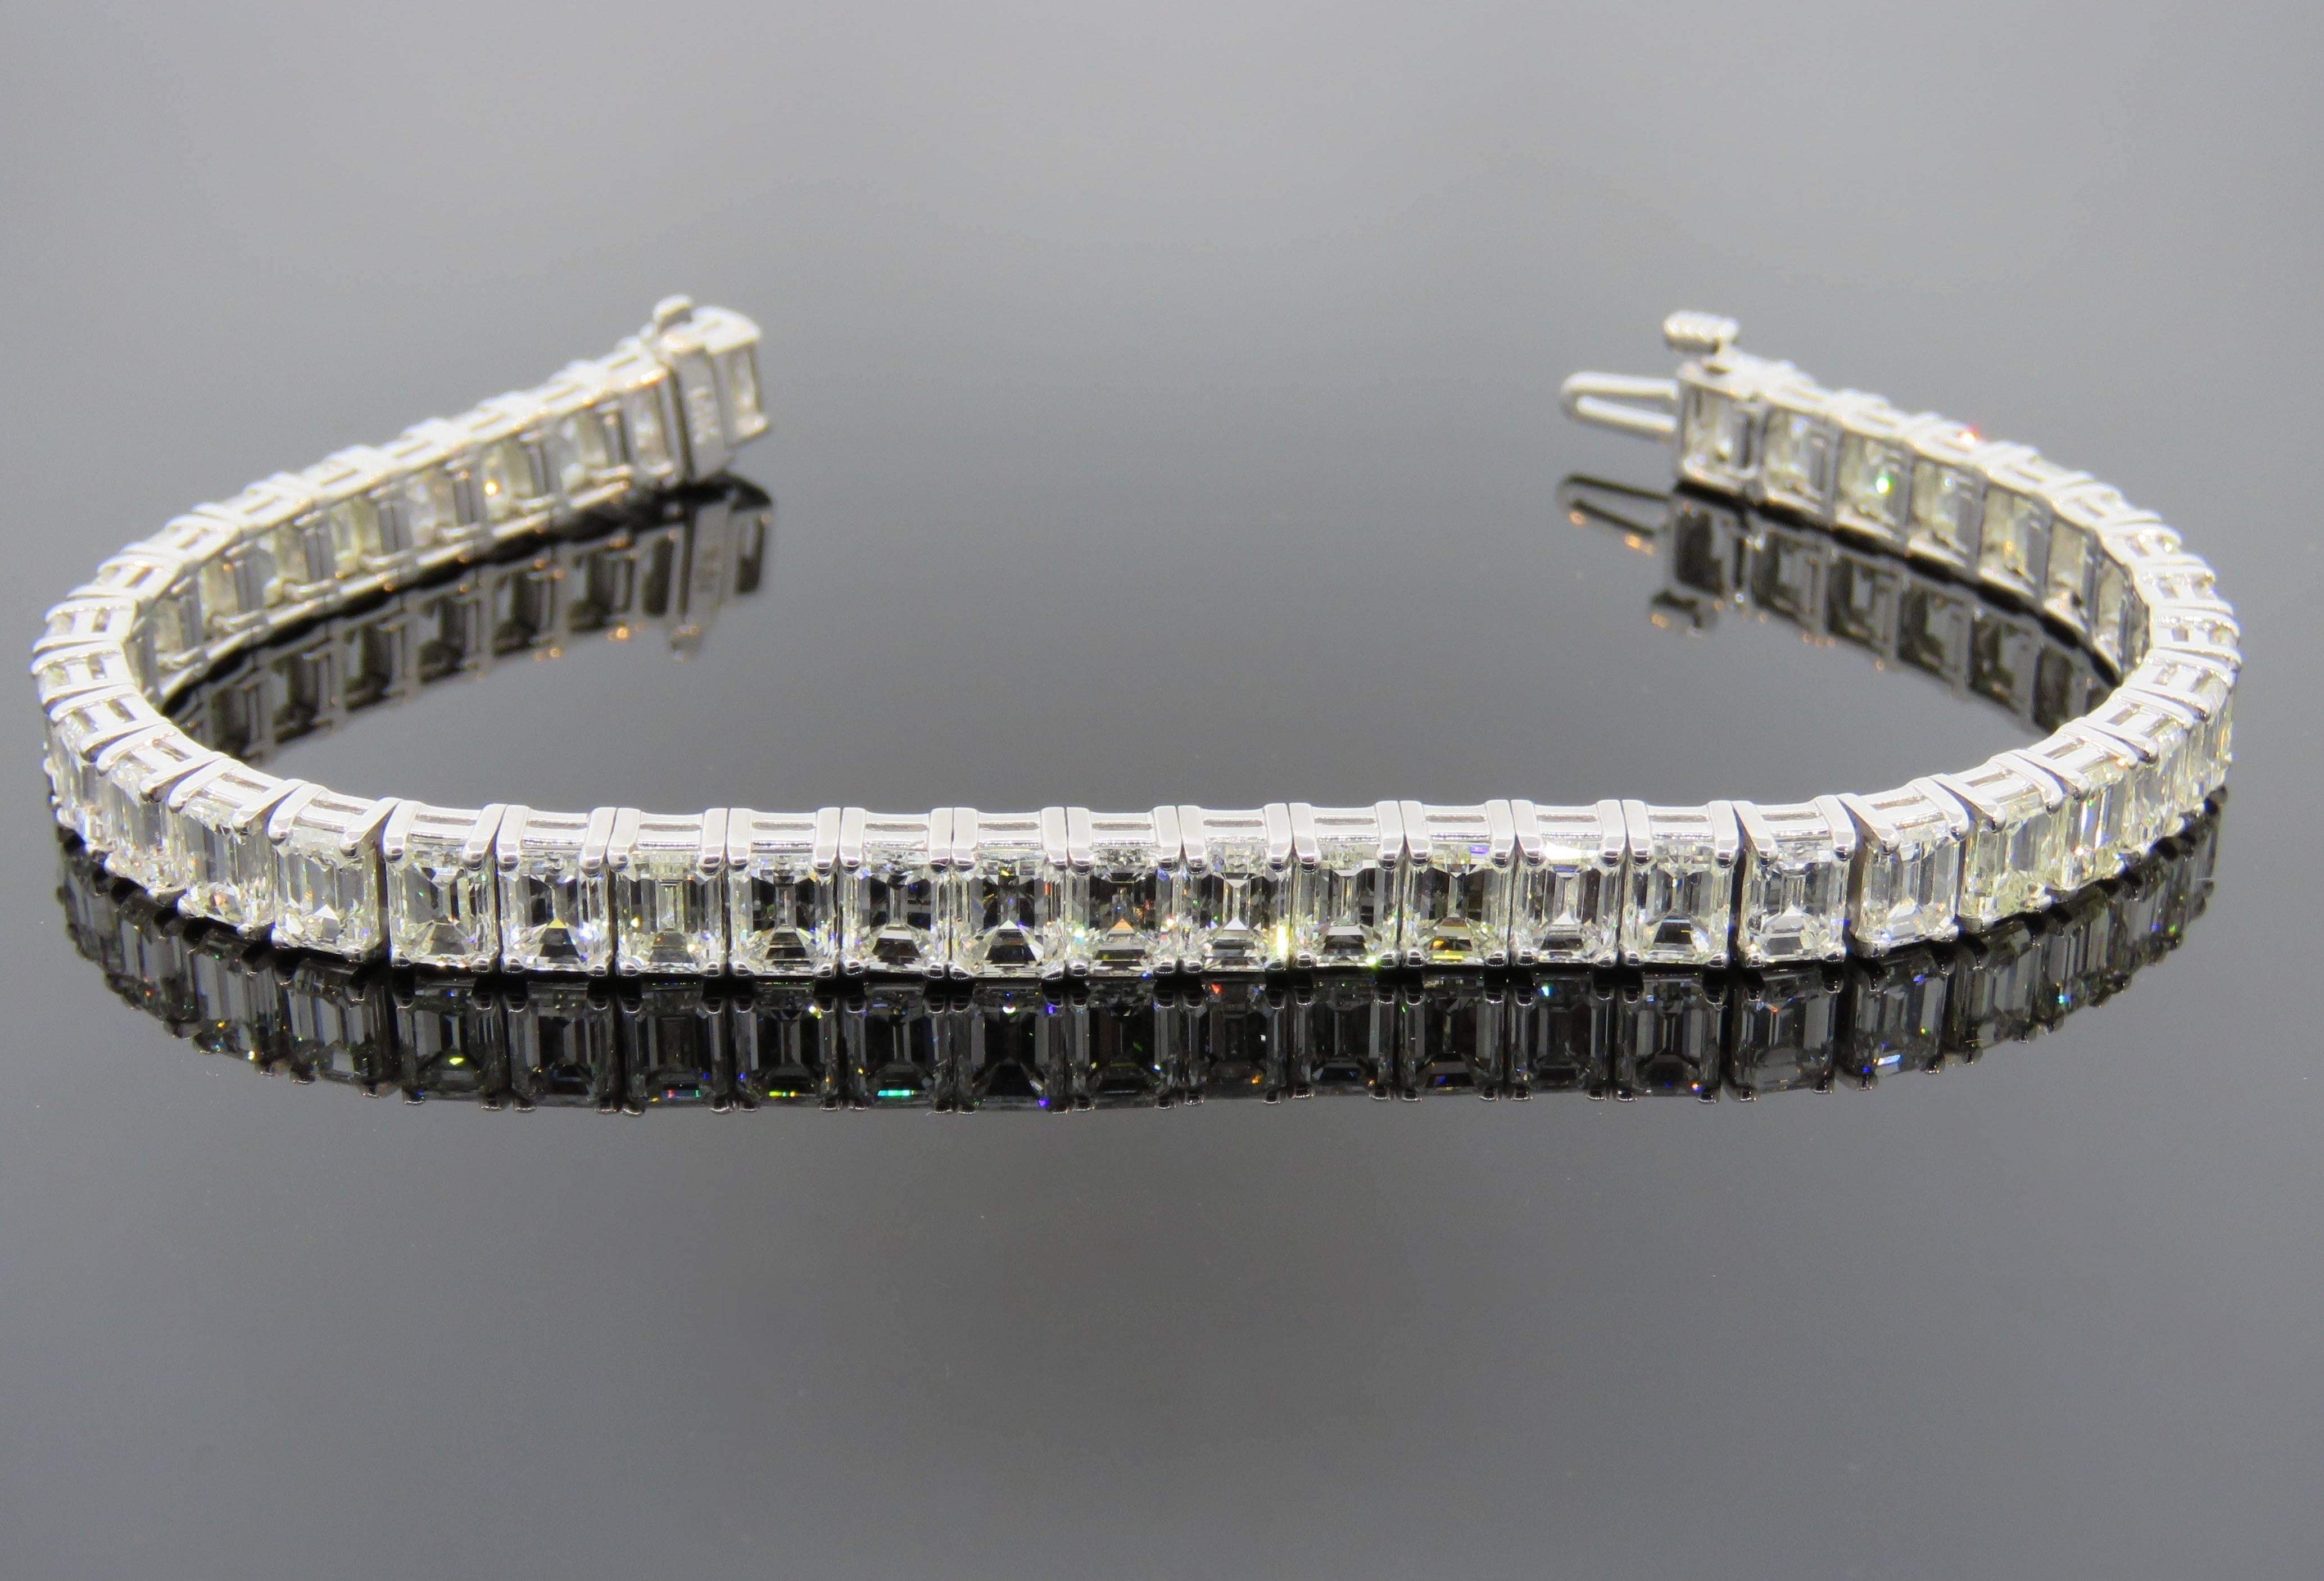 42 emerald cut diamonds, weighing a total of 22 carats make up this incredible bracelet! With an average of .52 pts per stone, these prong set diamonds come together to make an eye-catching, breathtaking bracelet. 
These high-quality, VS-SI clarity,